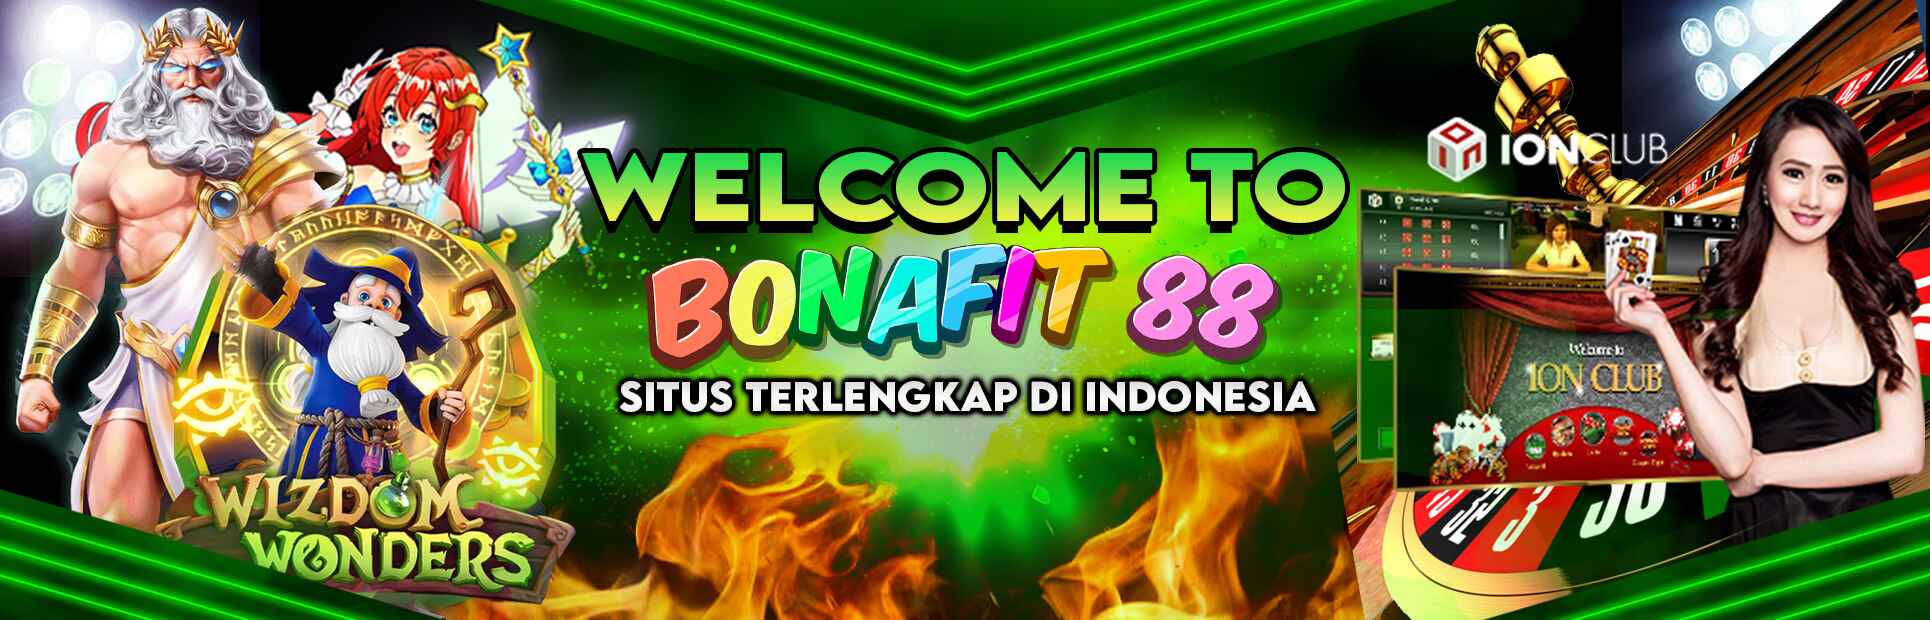 Welcome to BONAFIT88